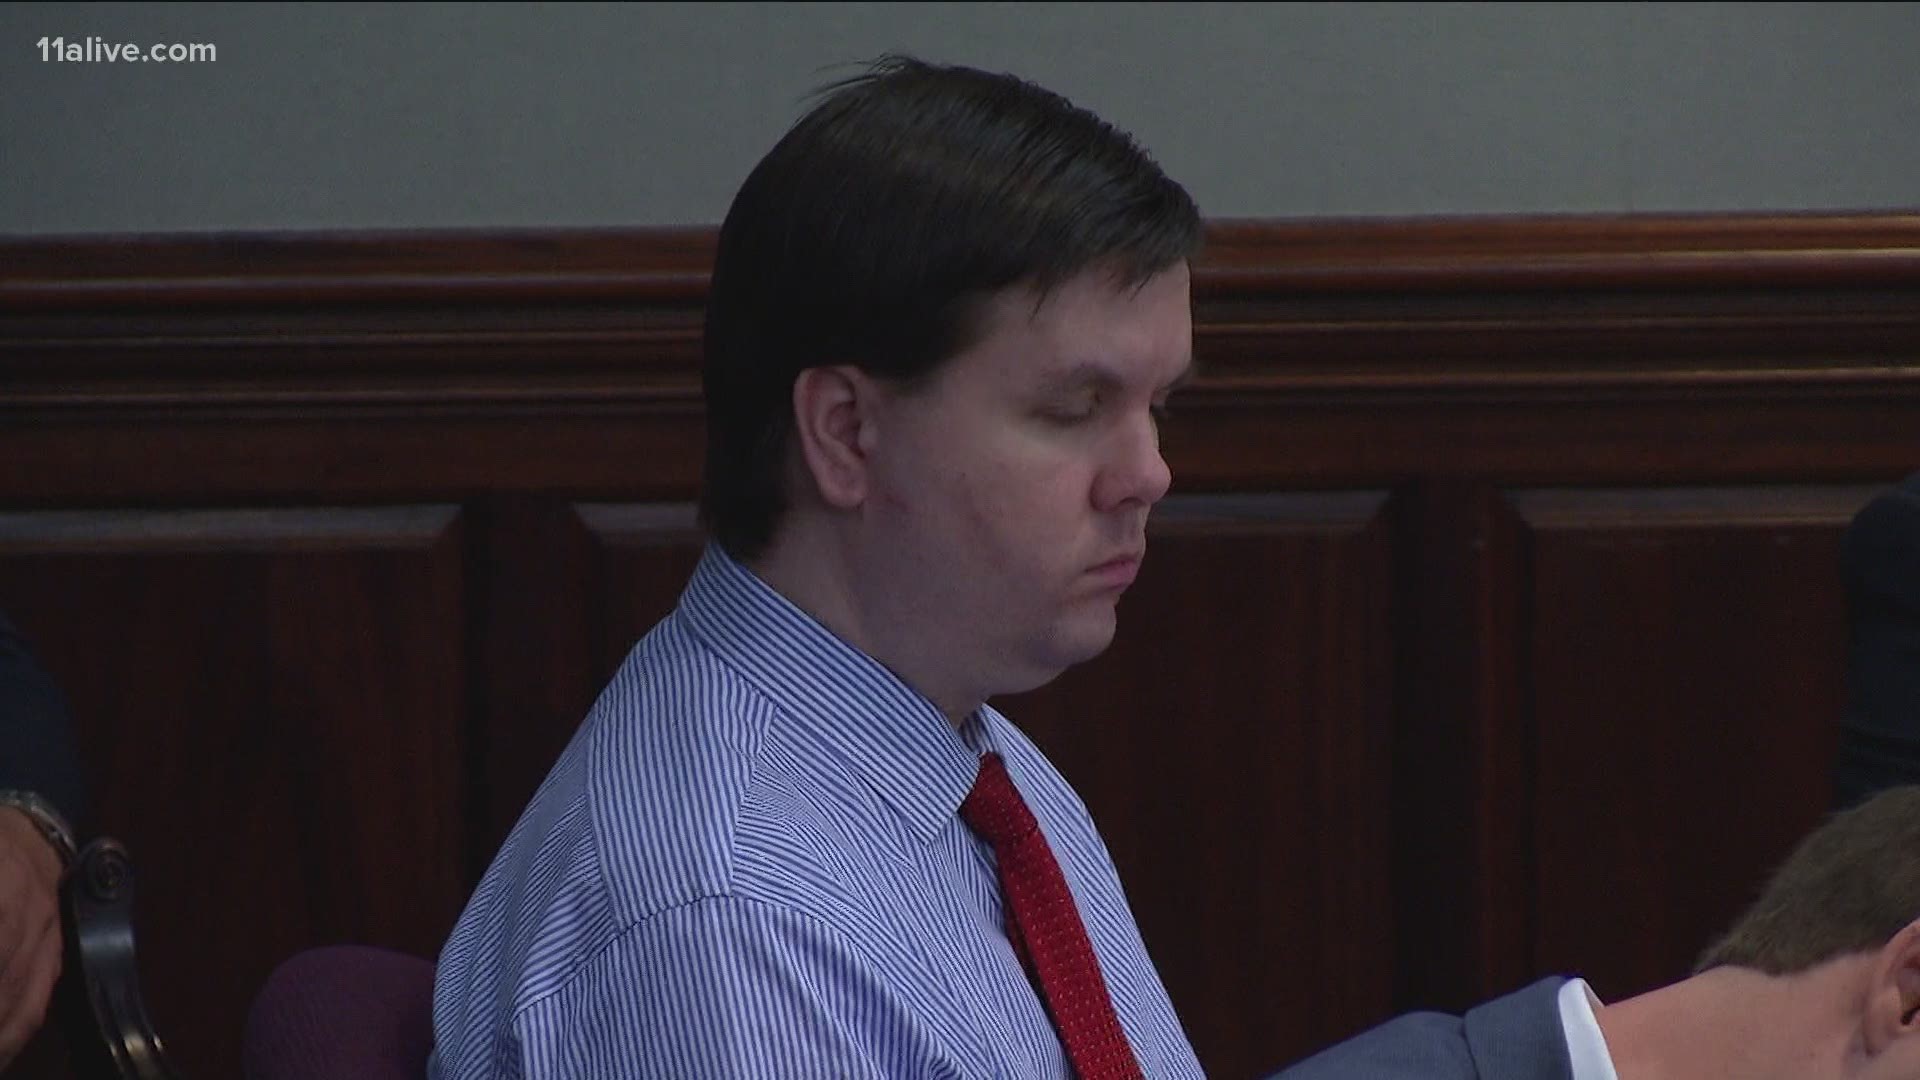 Lawyers for the Cobb county father convicted in 2016 for the hot-car death of his 22-month-old son are trying to get him a new trial.